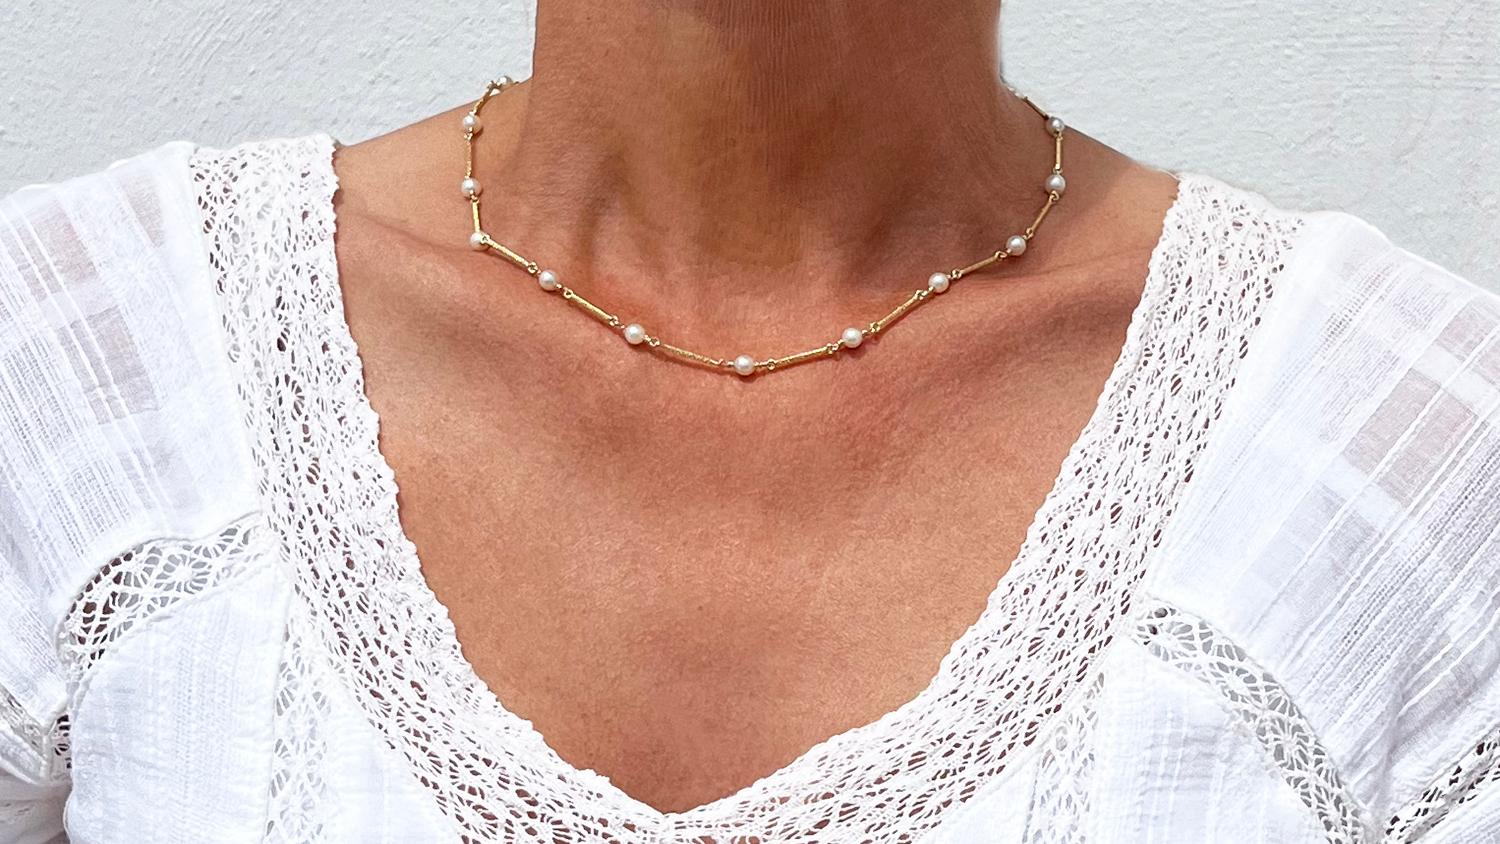 This 14 karat gold necklace is made of rectangular golden bars which are linked together. The gold links have a hammared surface and each link is embraced by cultured pearls. The necklace closes easily with a box clasp and a safety hook.

The